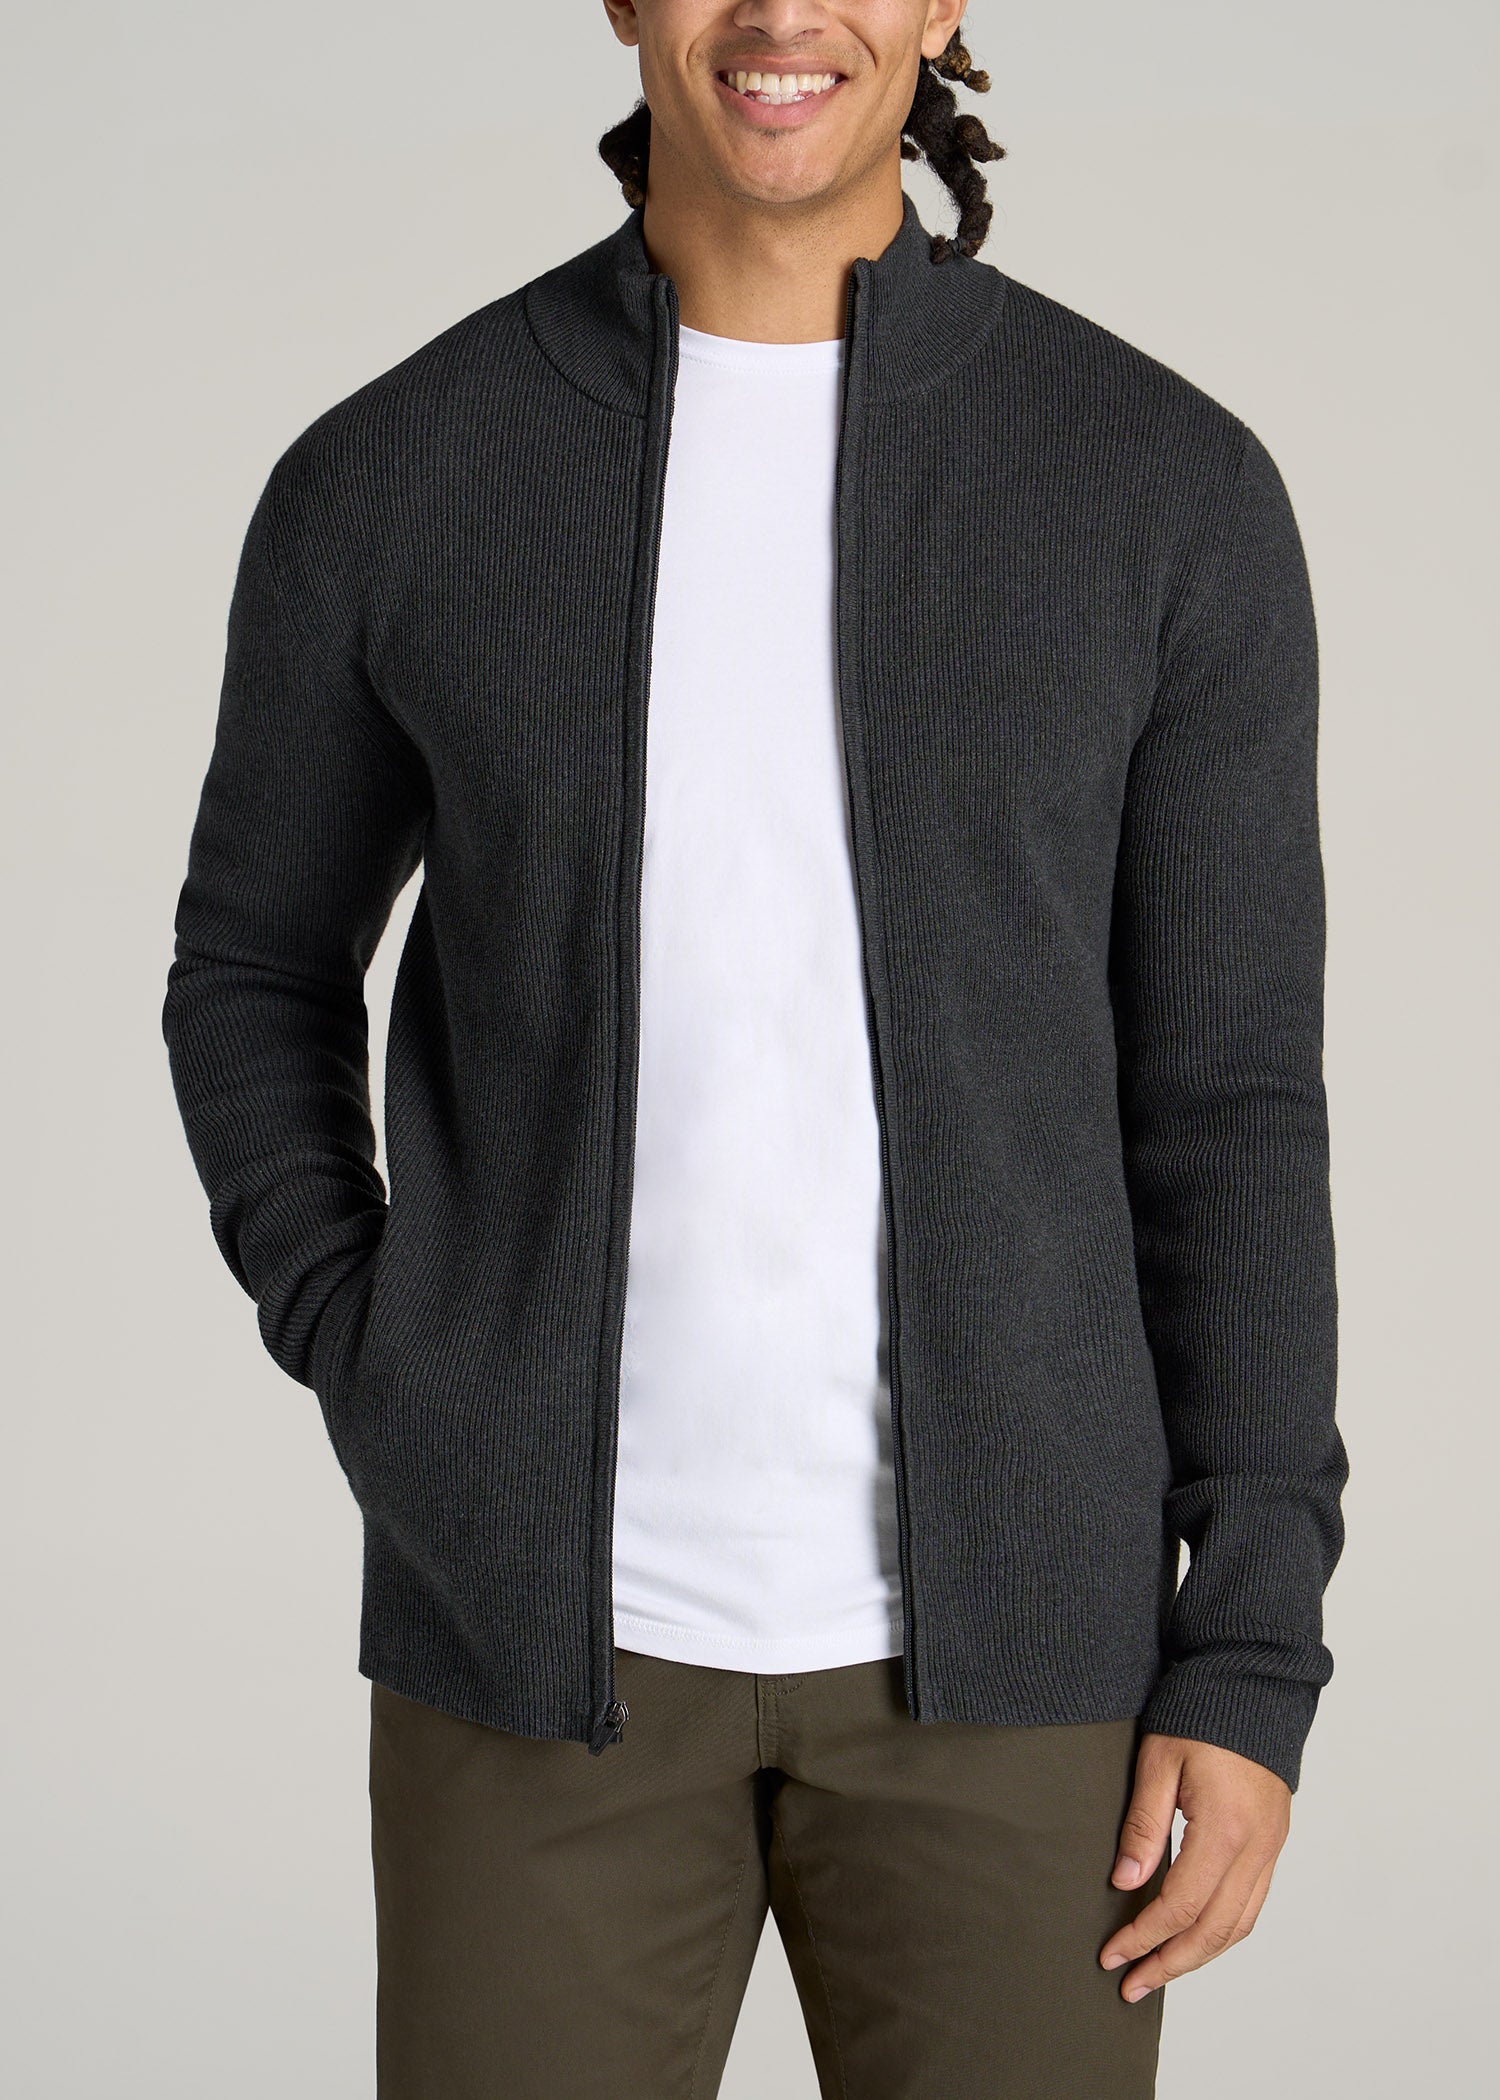 Men's Tall Full Zip Sweater in Charcoal Mix